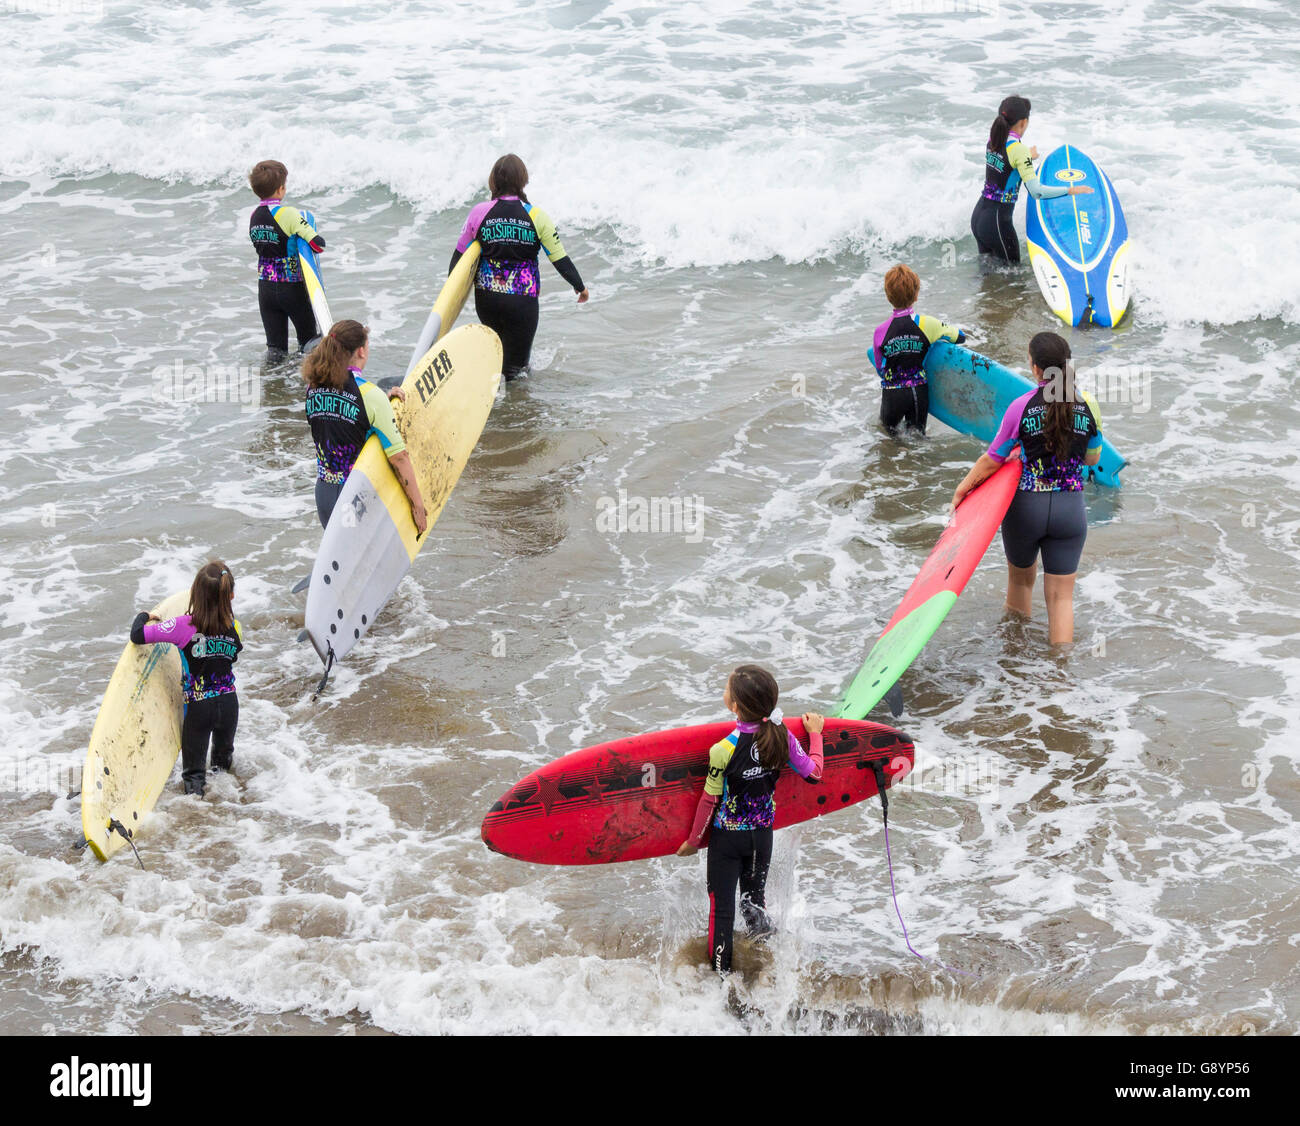 Las Palmas, Gran Canaria, Canary Islands, Spain, 30th June 2016. Weather: Surf schools are busy on the city beach in Las Palmas as Spanish schoolchildren keep active during their long summer holidays (20th June - 9th September). Credit:  Alan Dawson News/Alamy Live News Stock Photo